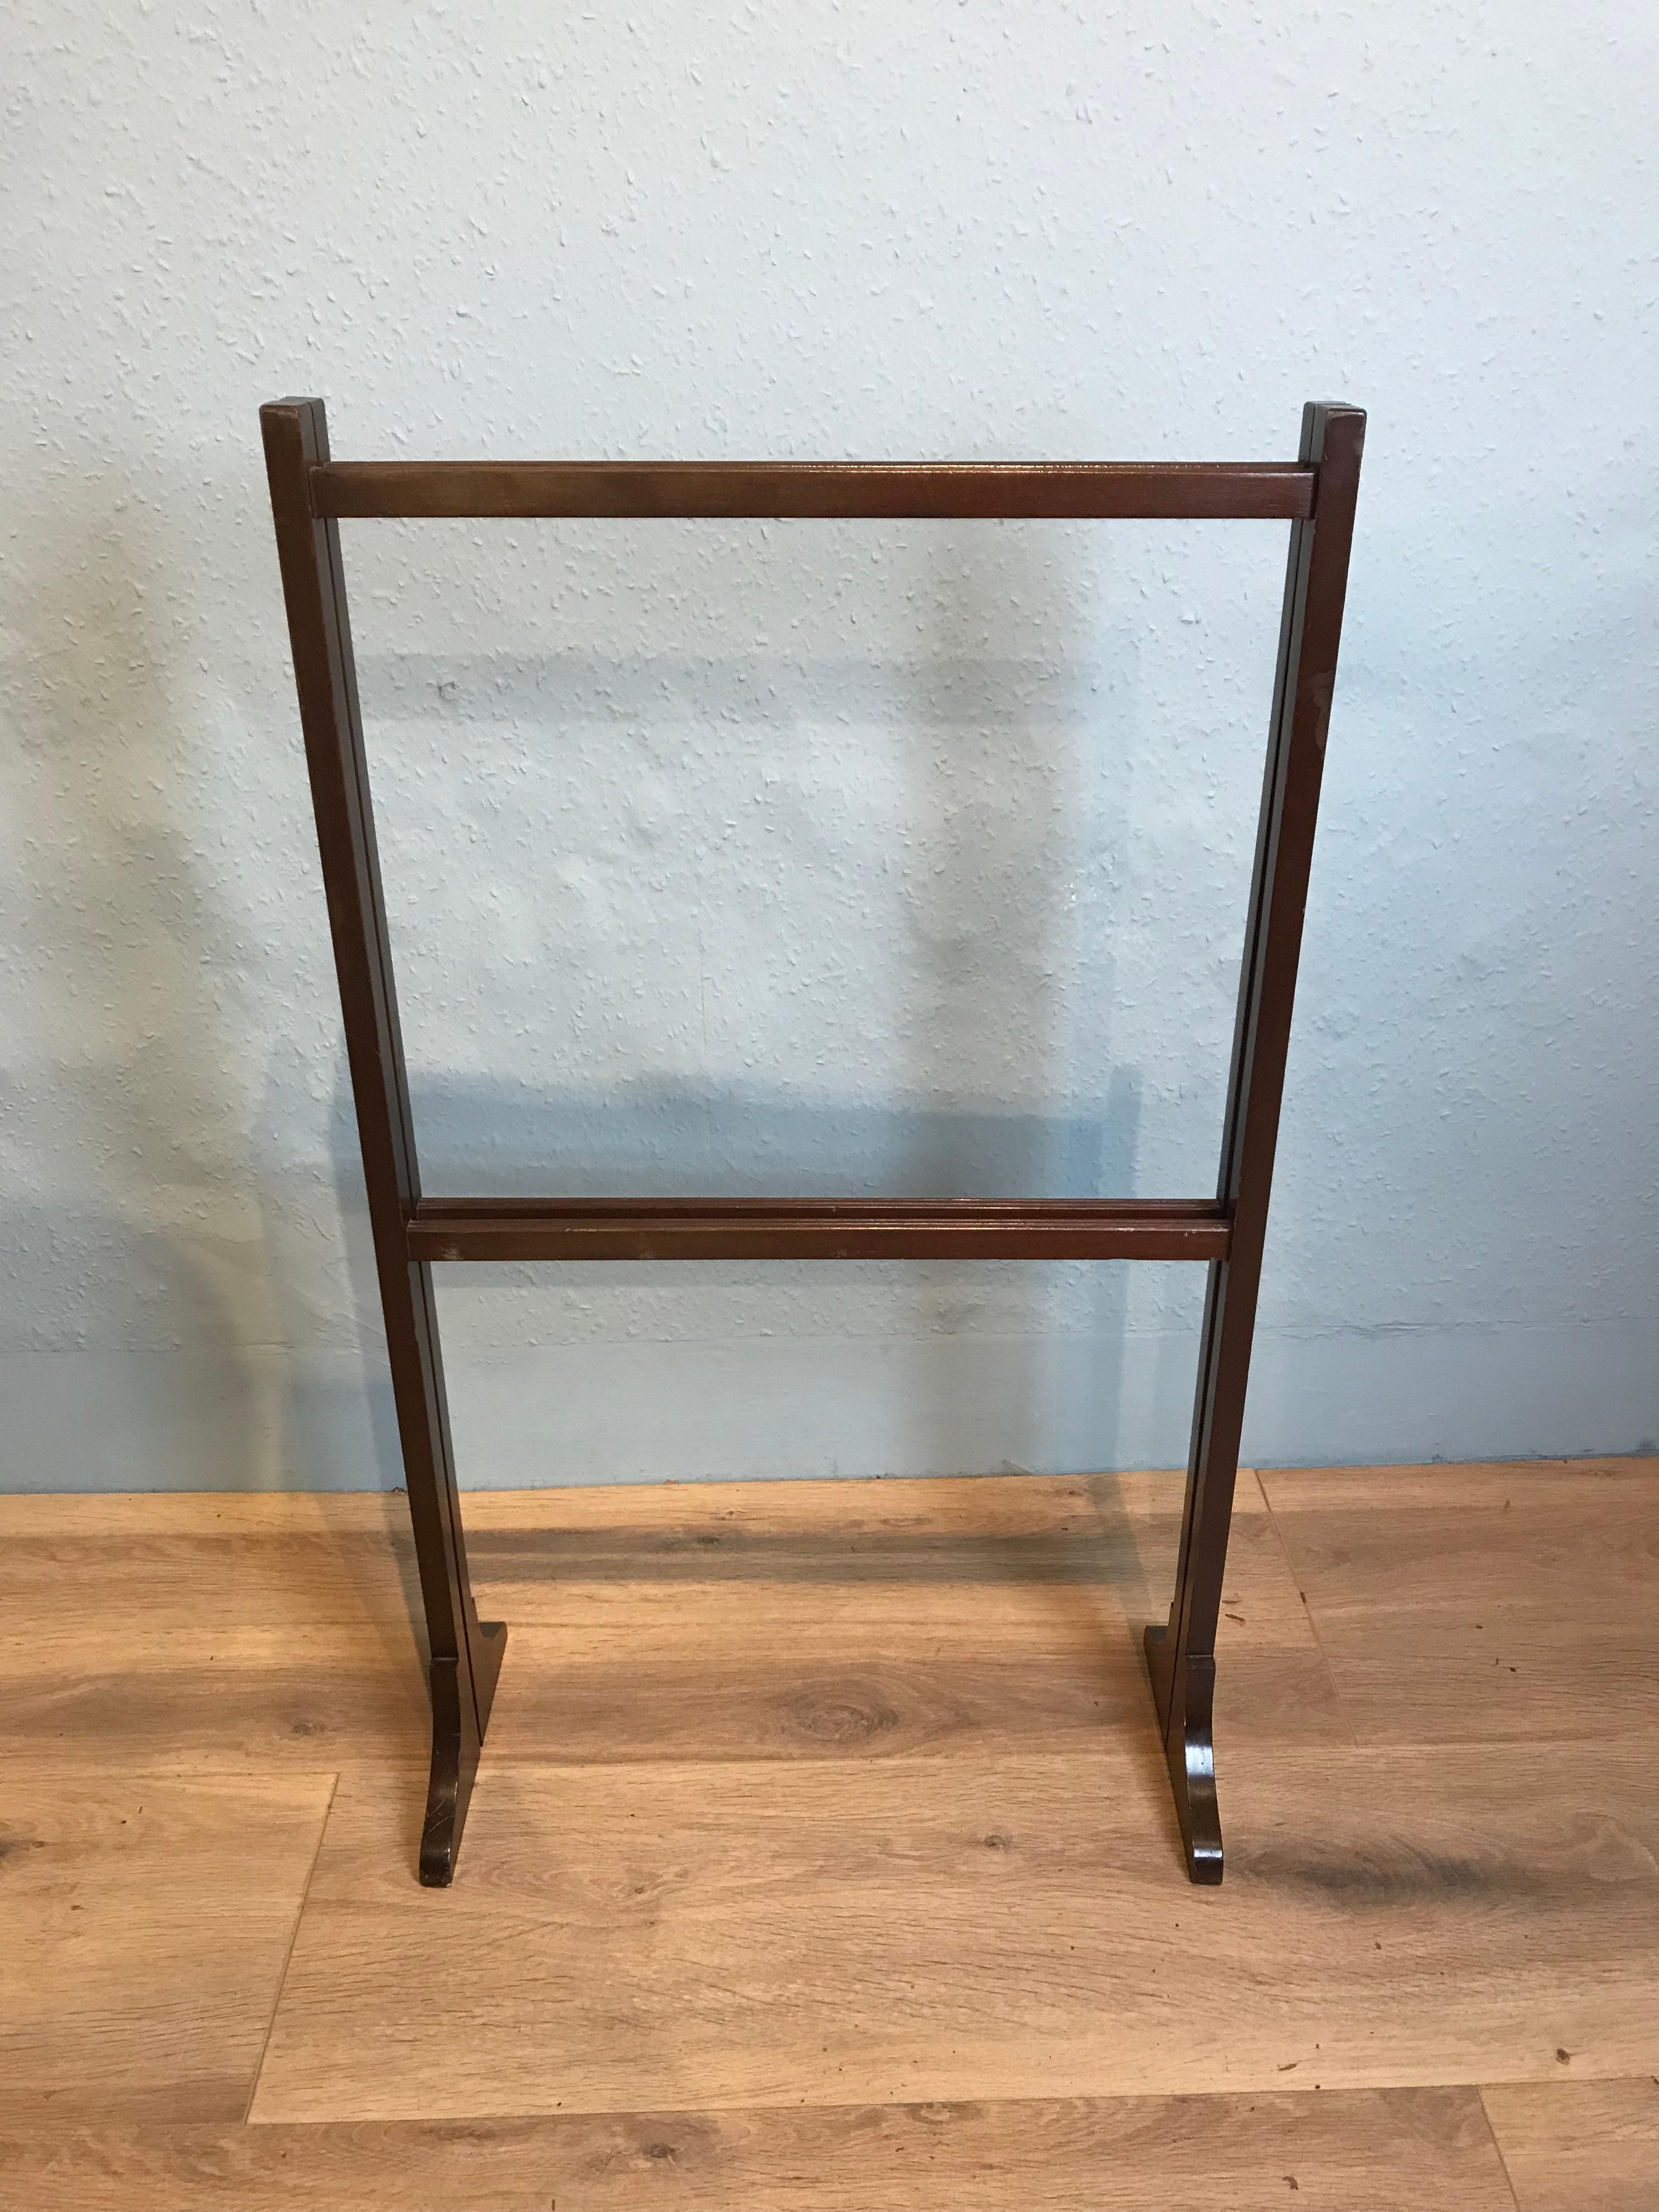 A very elegant antique English Georgian mahogany towel. Made in 1820, it has attractive reeding to the cross rails and slender proportions. This useful towel rail is in very good condition, and would add a touch of country house glamour to any